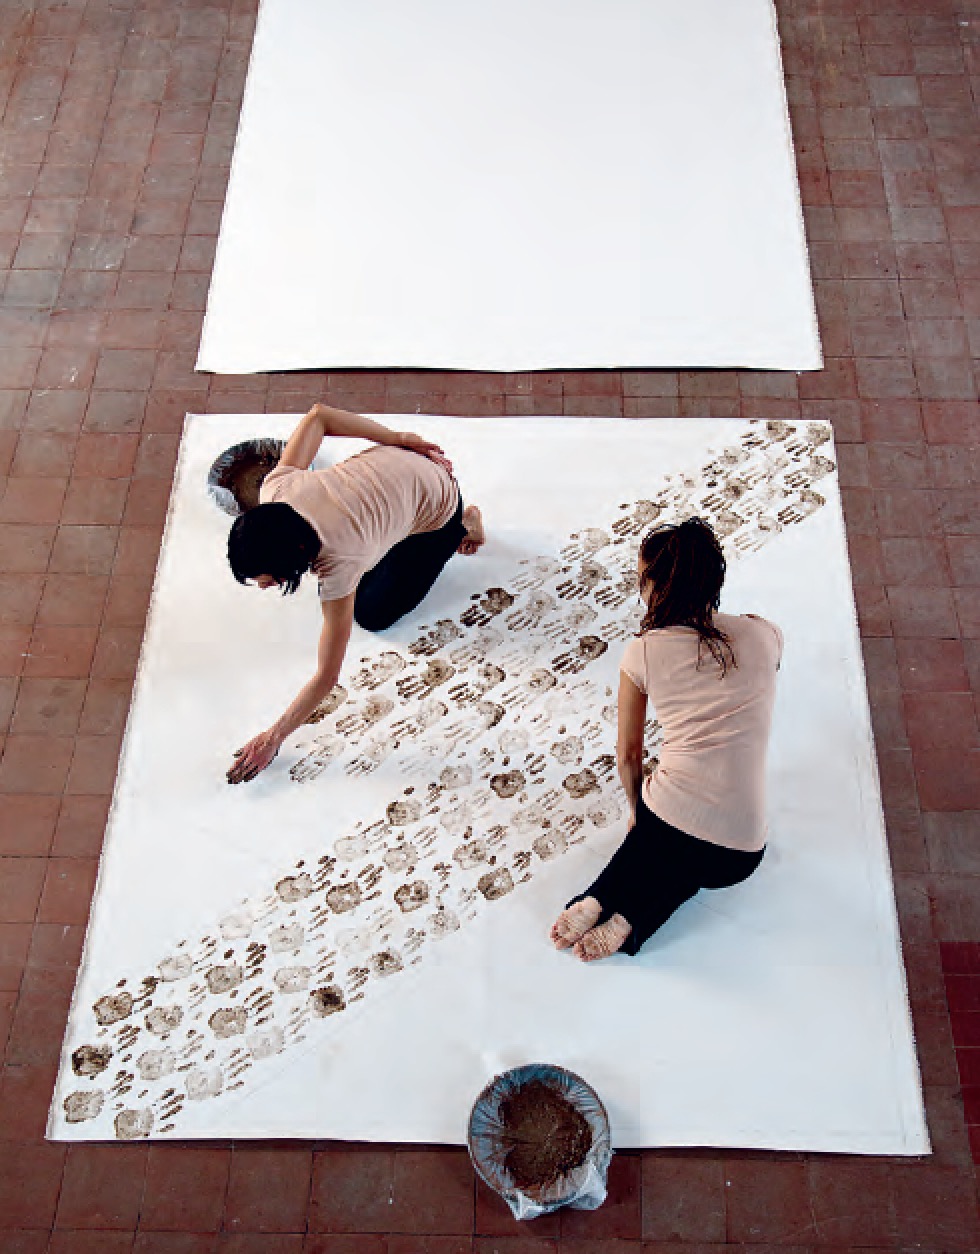 Being Human Being with Jeannette Ehlers, 2014 5-hour performance in ‘Being Human Being 1’ exhibition, Kunsthal Nikolaj, Copenhagen